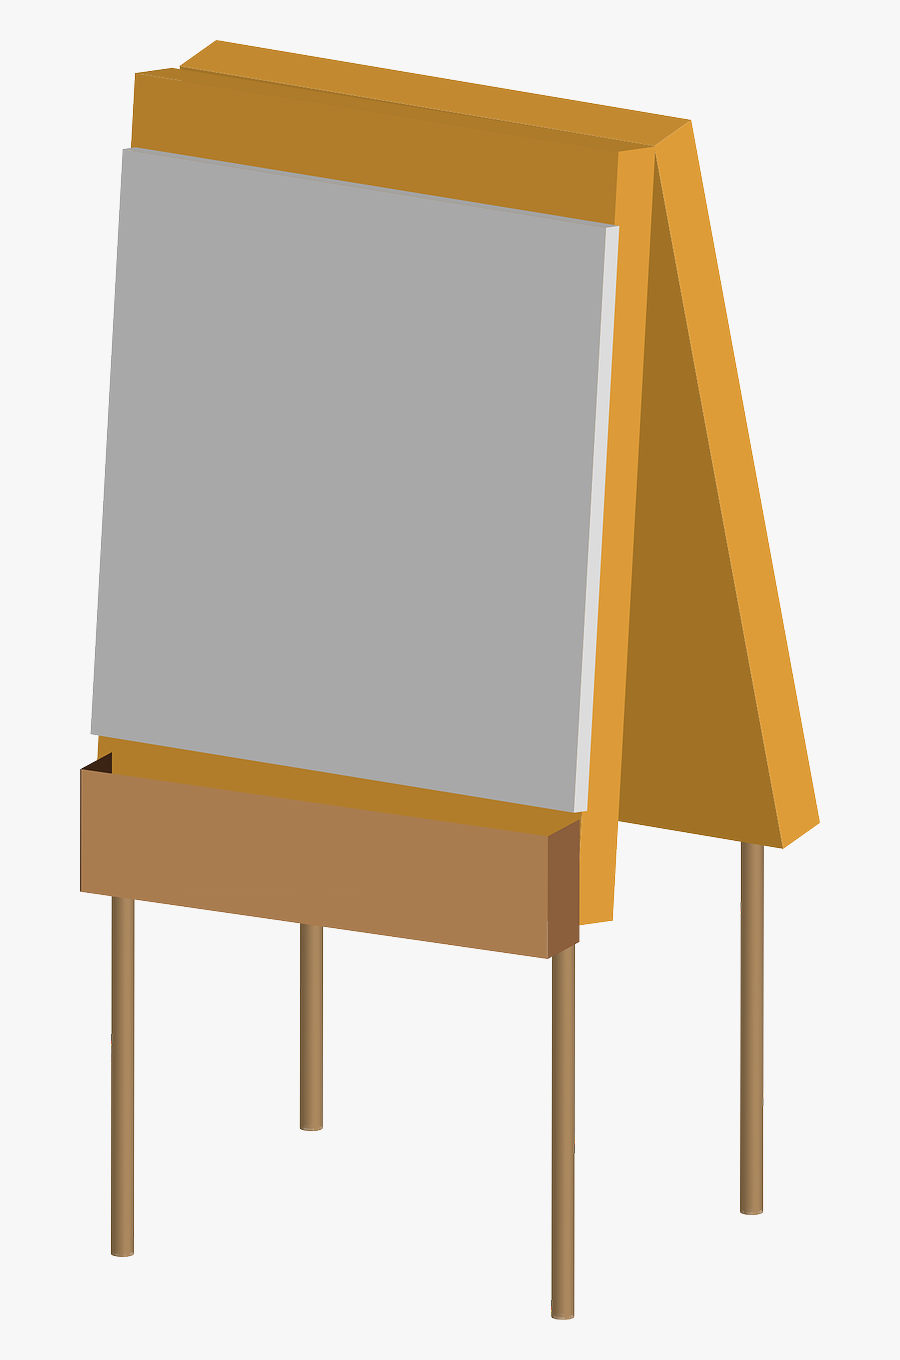 An Easel - Painting Canvas Png, Transparent Clipart